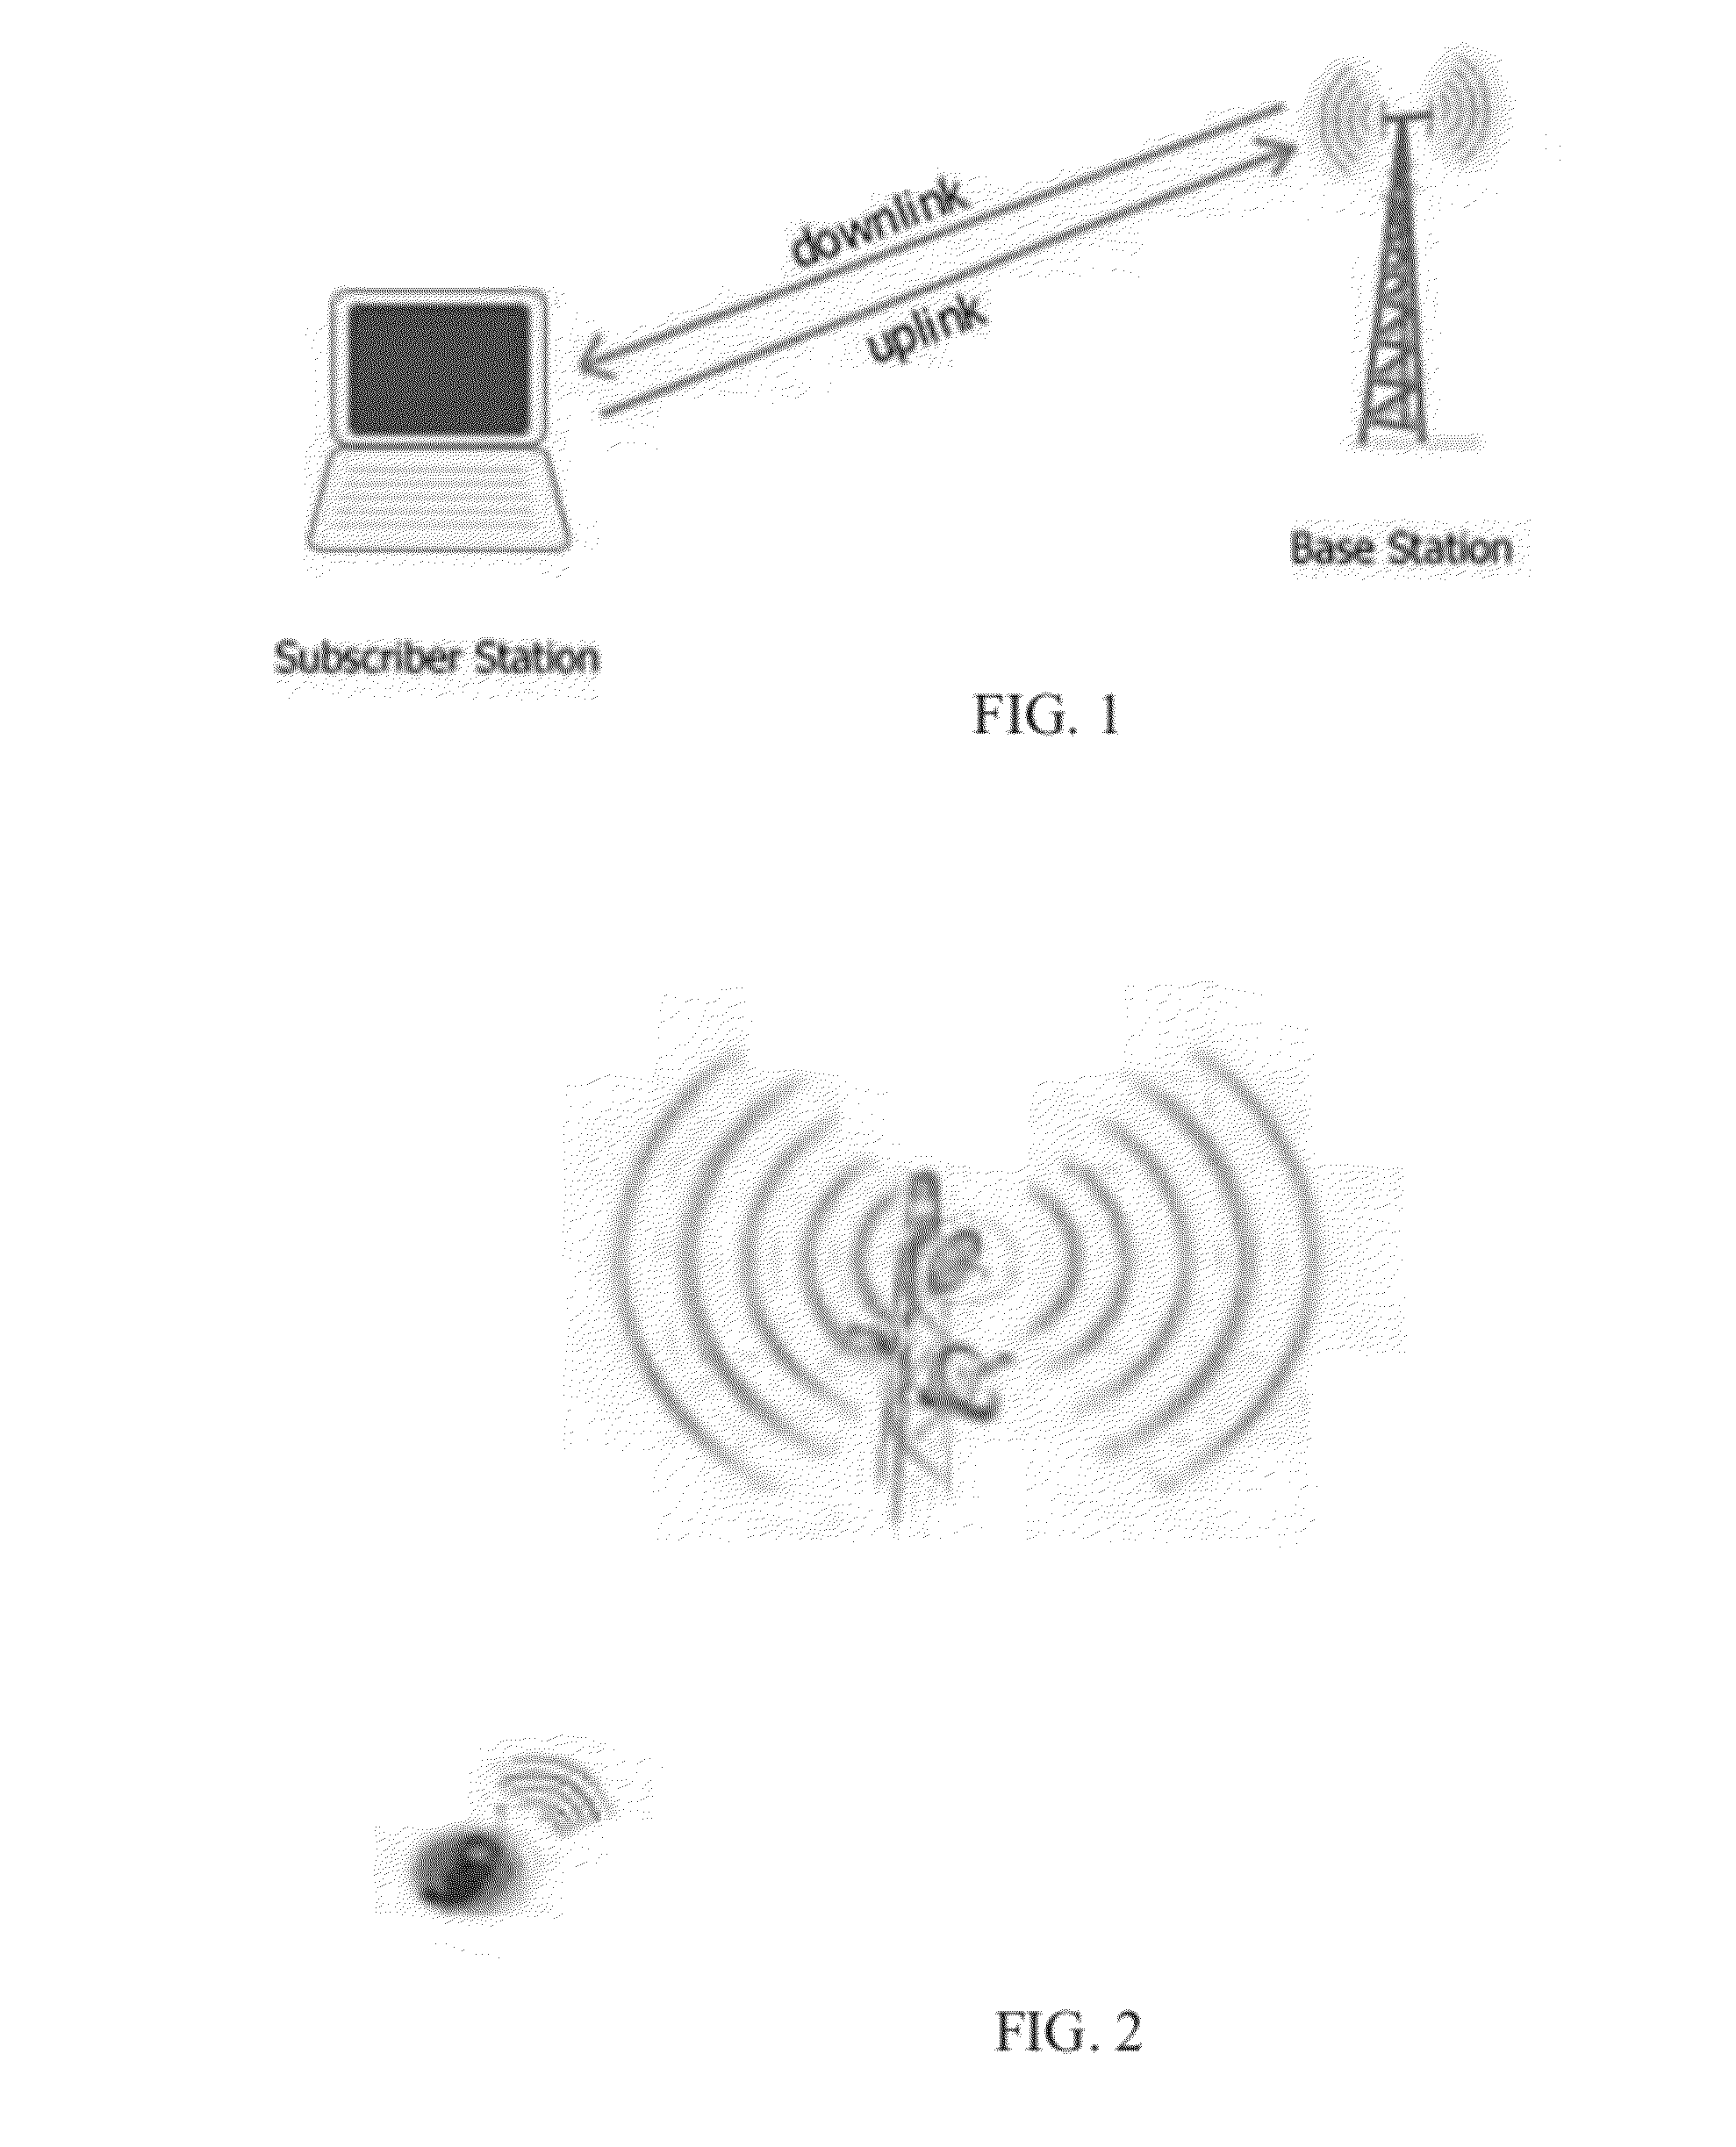 Method for a Canceling Self Interference Signal Using Active Noise Cancellation in the Air for Full Duplex Simultaneous (In Time) and Overlapping (In Space) Wireless Transmission & Reception on the Same Frequency band